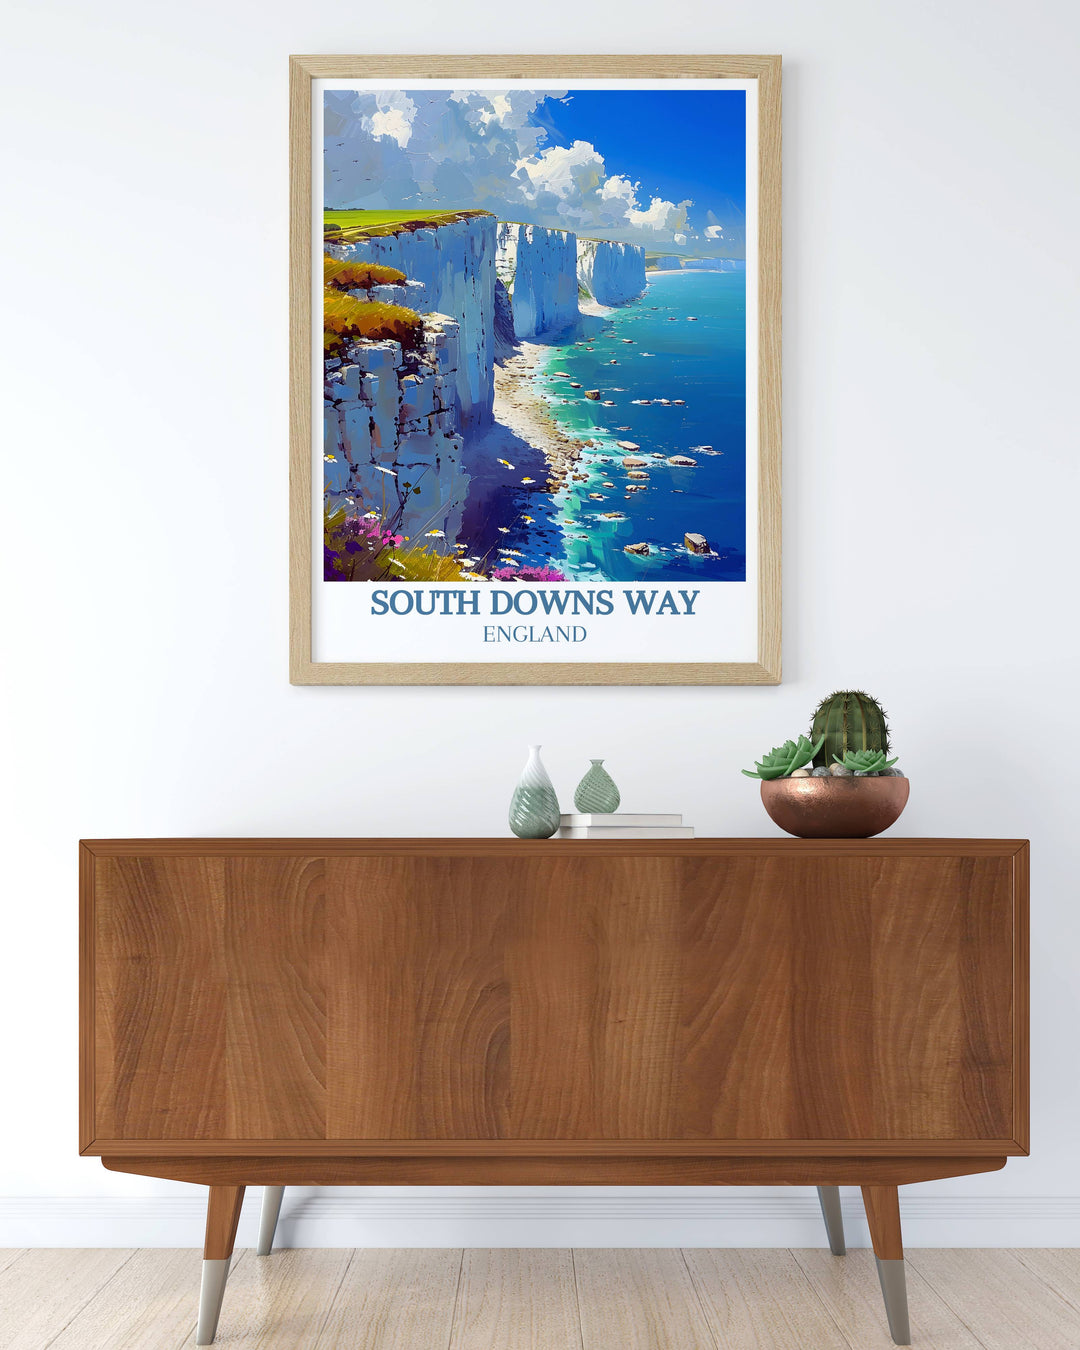 Celebrate the beauty of Sussex with our fine art prints, highlighting the vibrant wildflowers, tranquil pathways, and rolling hills of this enchanting region